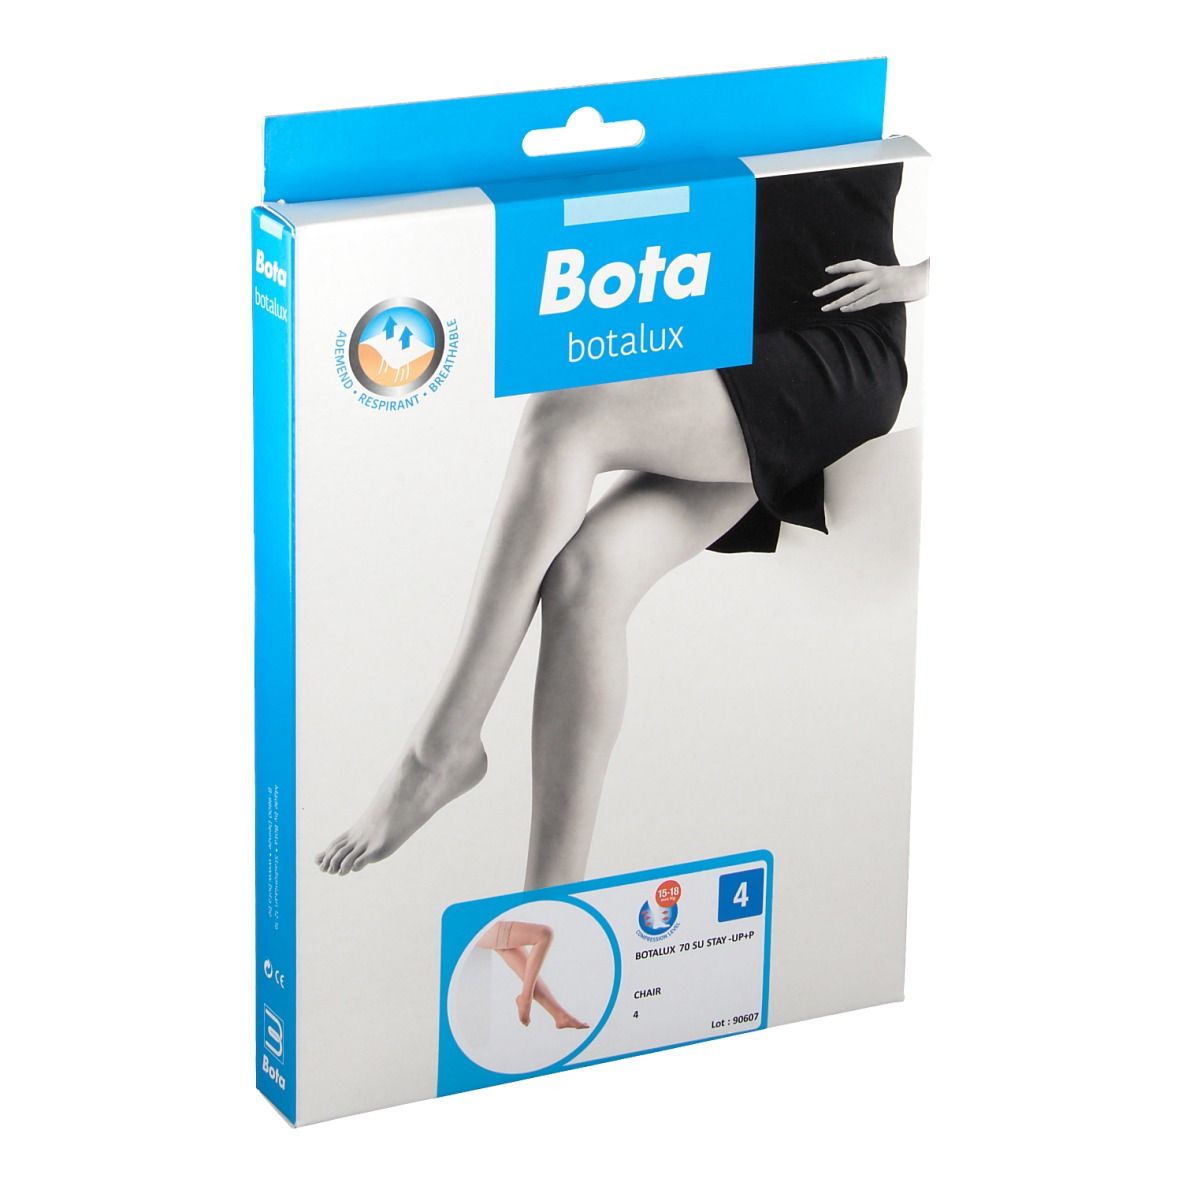 Bota Botalux 70 SU chair Taille 4